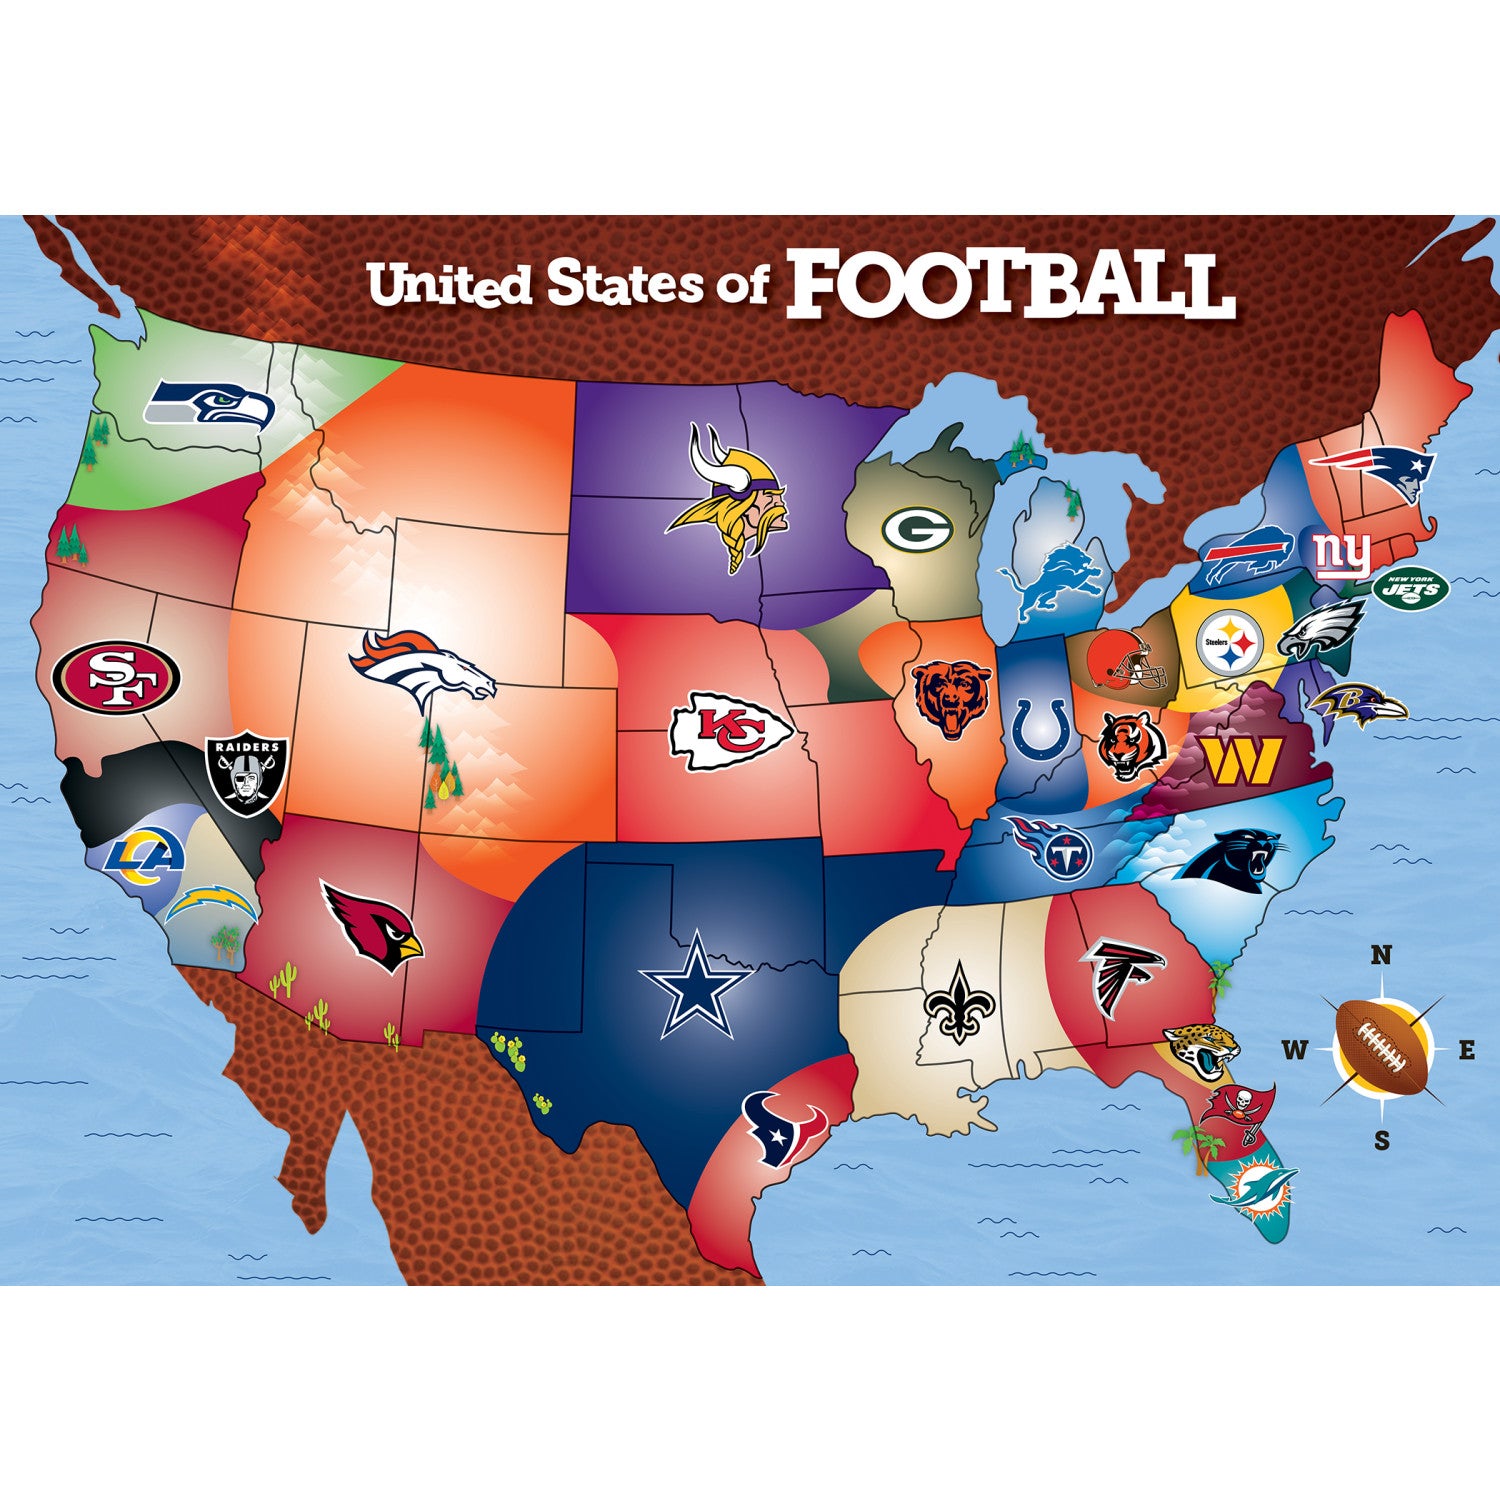 NFL Football Map 500 Piece Puzzle United States of Football Complete